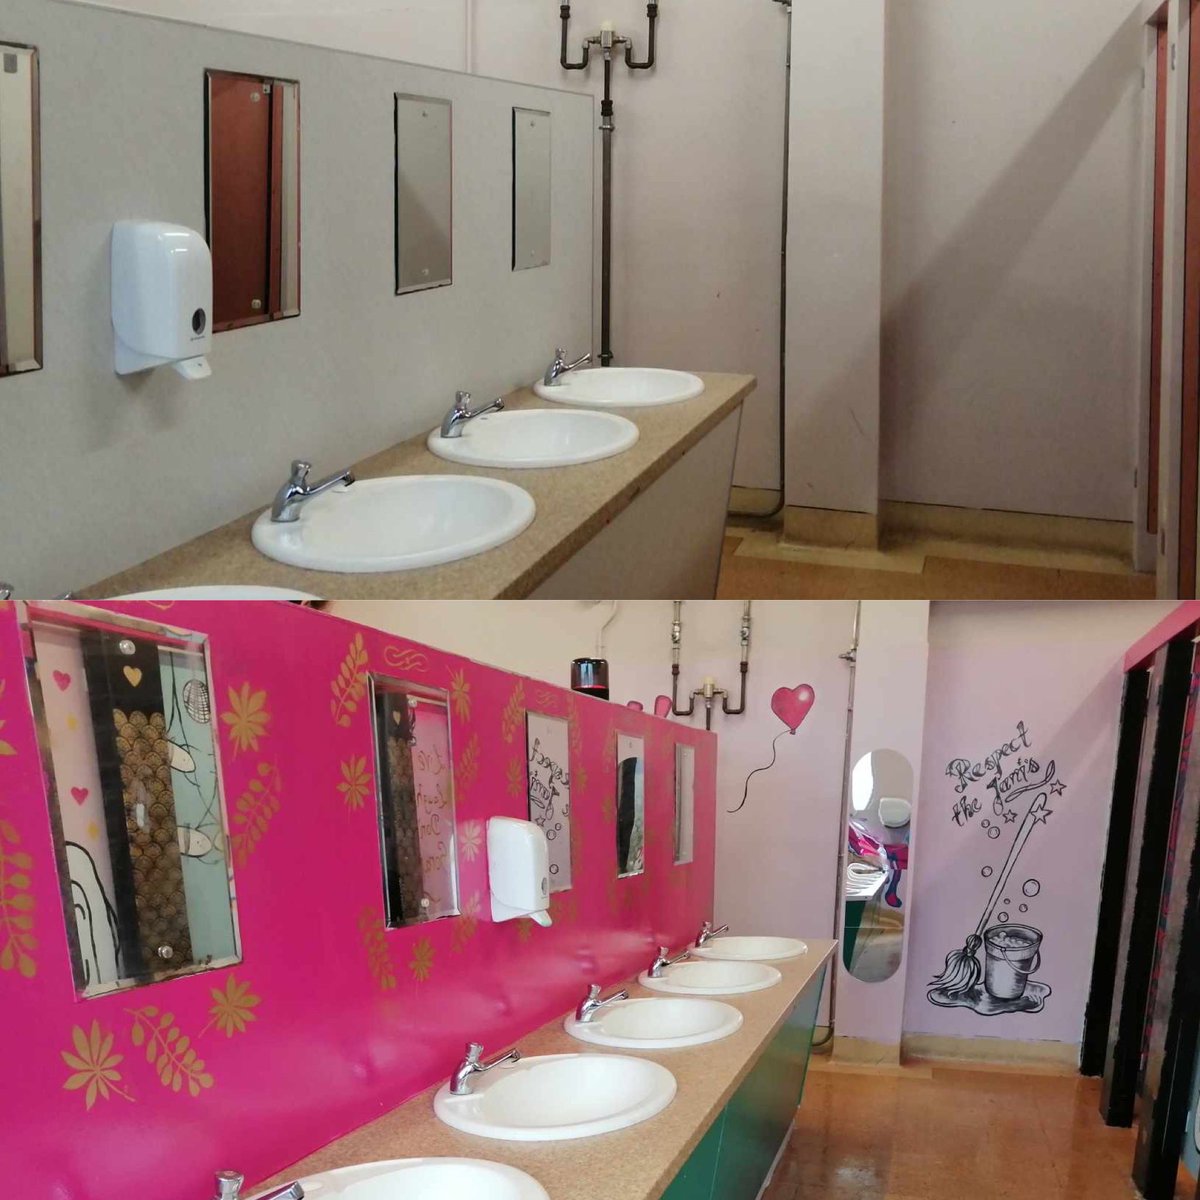 Some before and afters of our amazing project at @Gala_Academy in the girls toilets. Working with young people who designed, prepped and painted the toilets over the Easter holidays they have breathed new life into the space and learnt some amazing skills in the process.